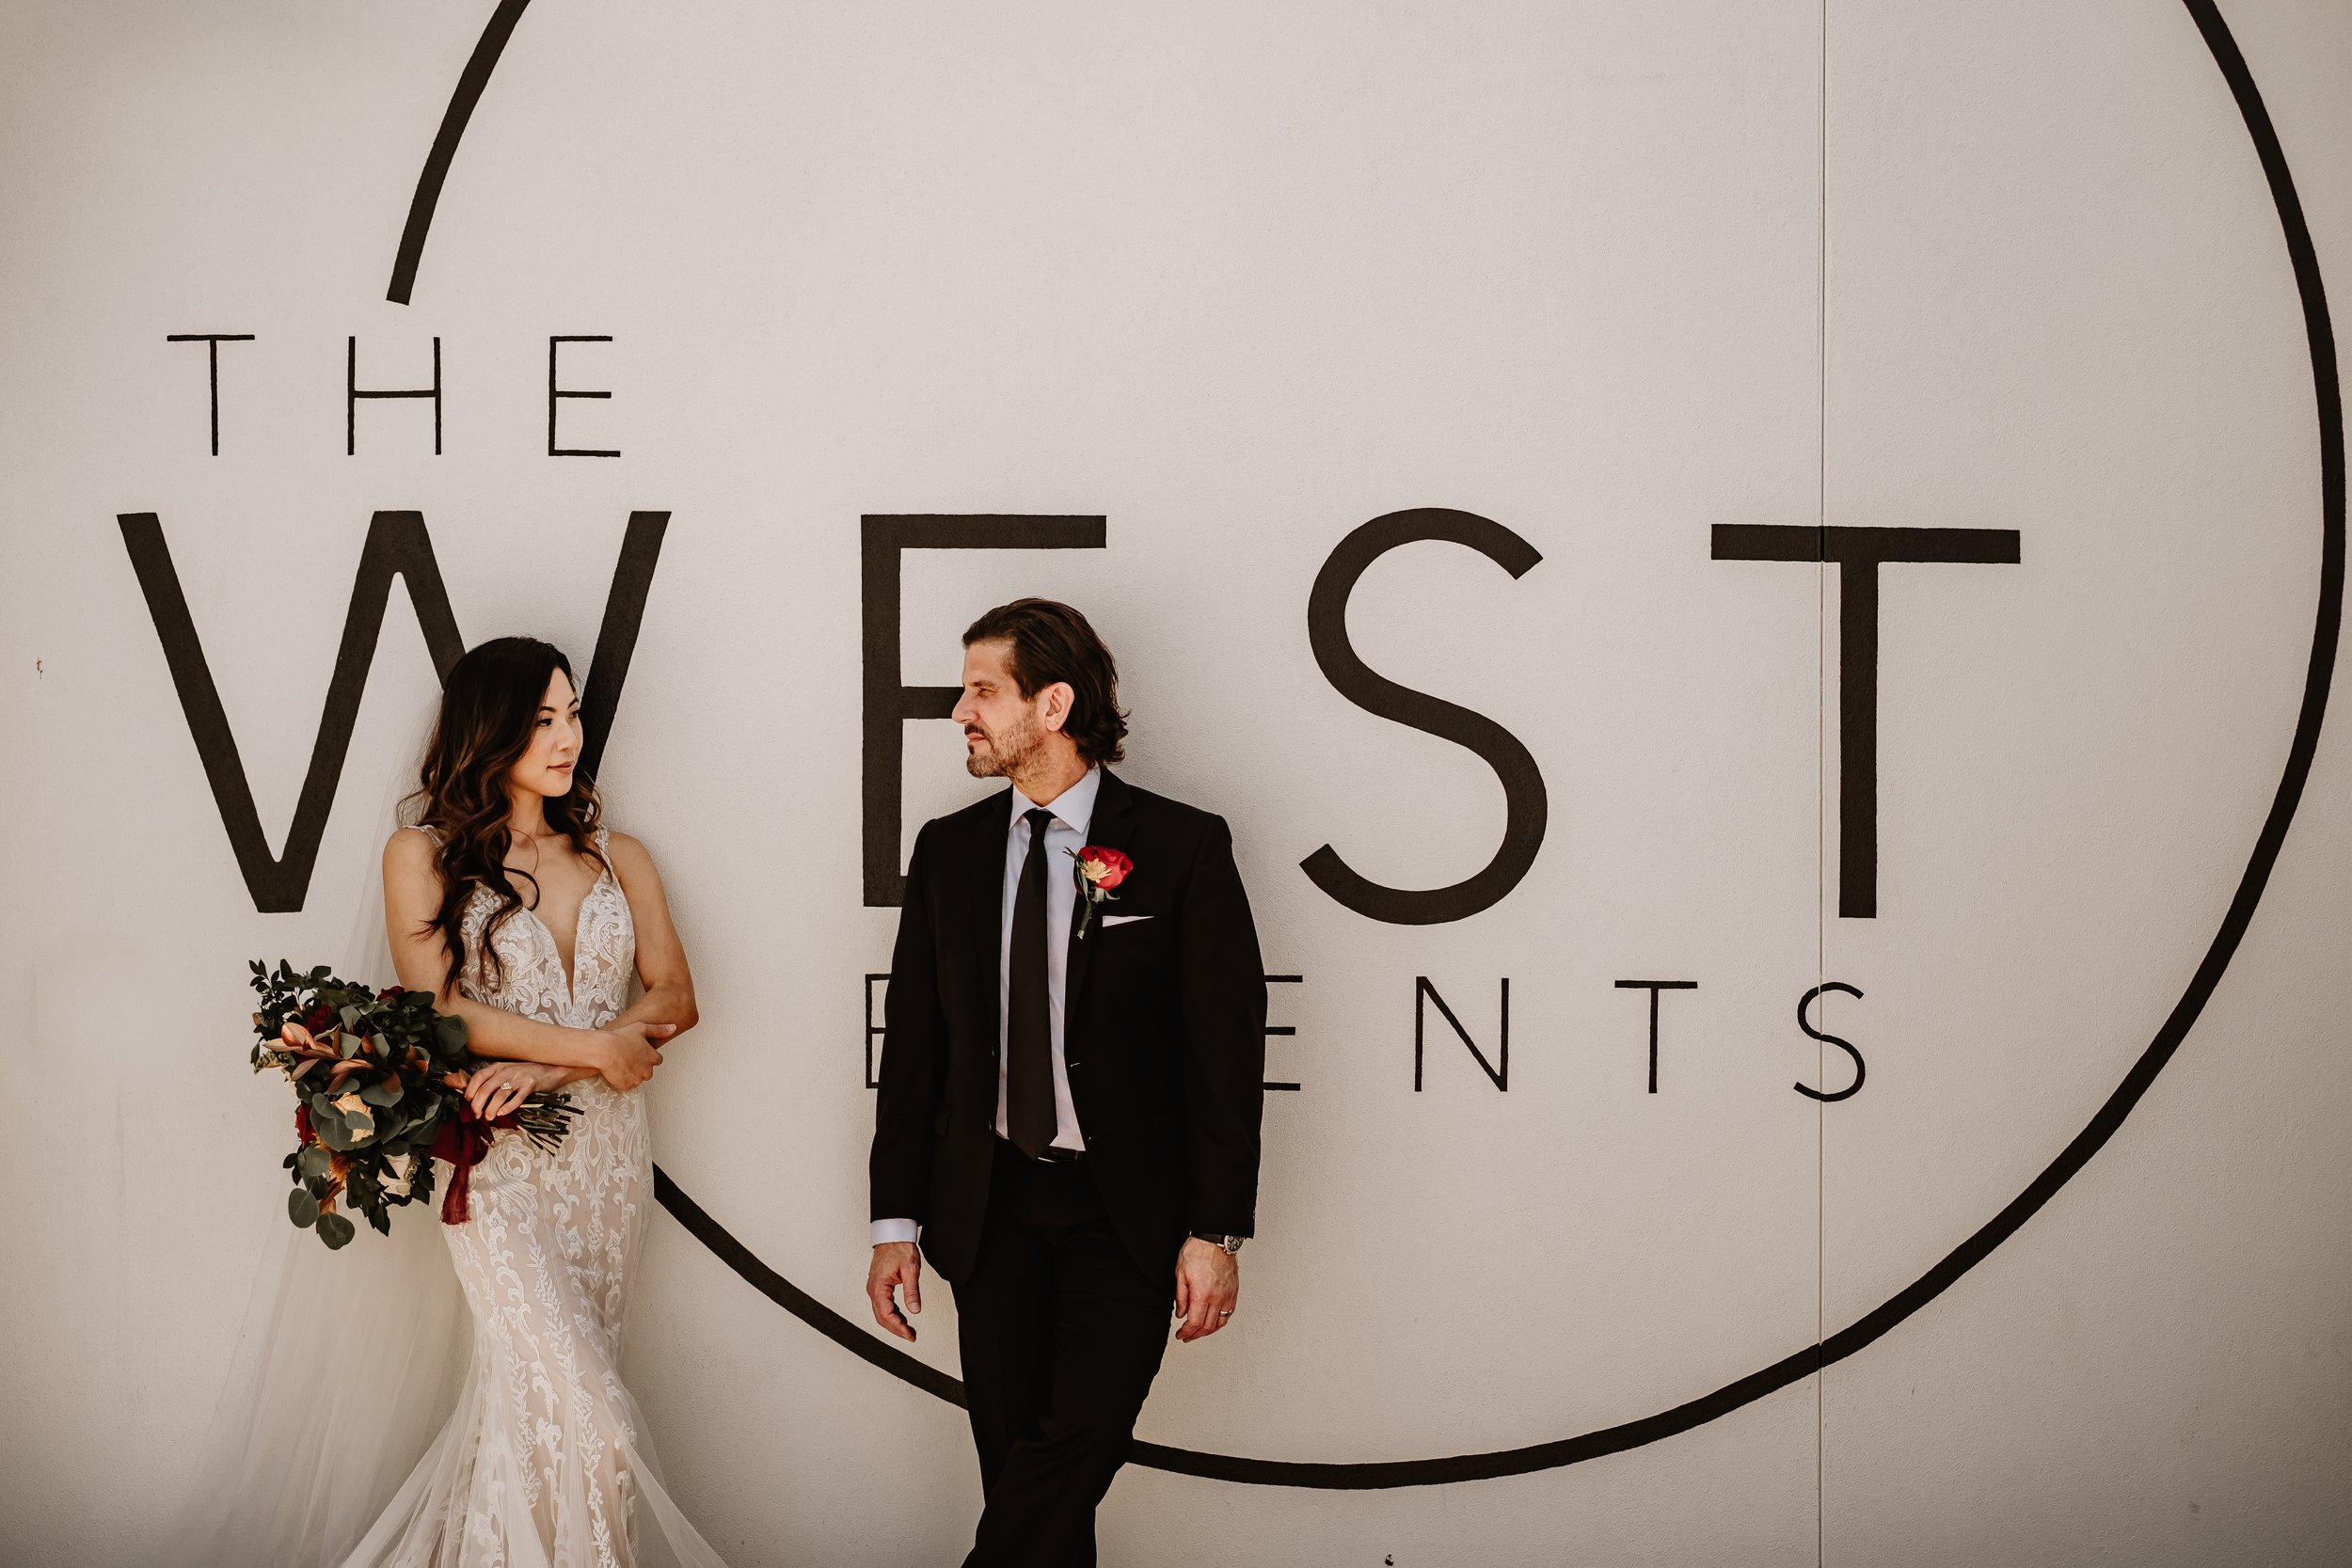 the-west-events-wedding-and-event-space-madeira-beach-florida-i-choose-you-events-styled-wedding-shoot-tampa-wedding-photographer-102.jpg